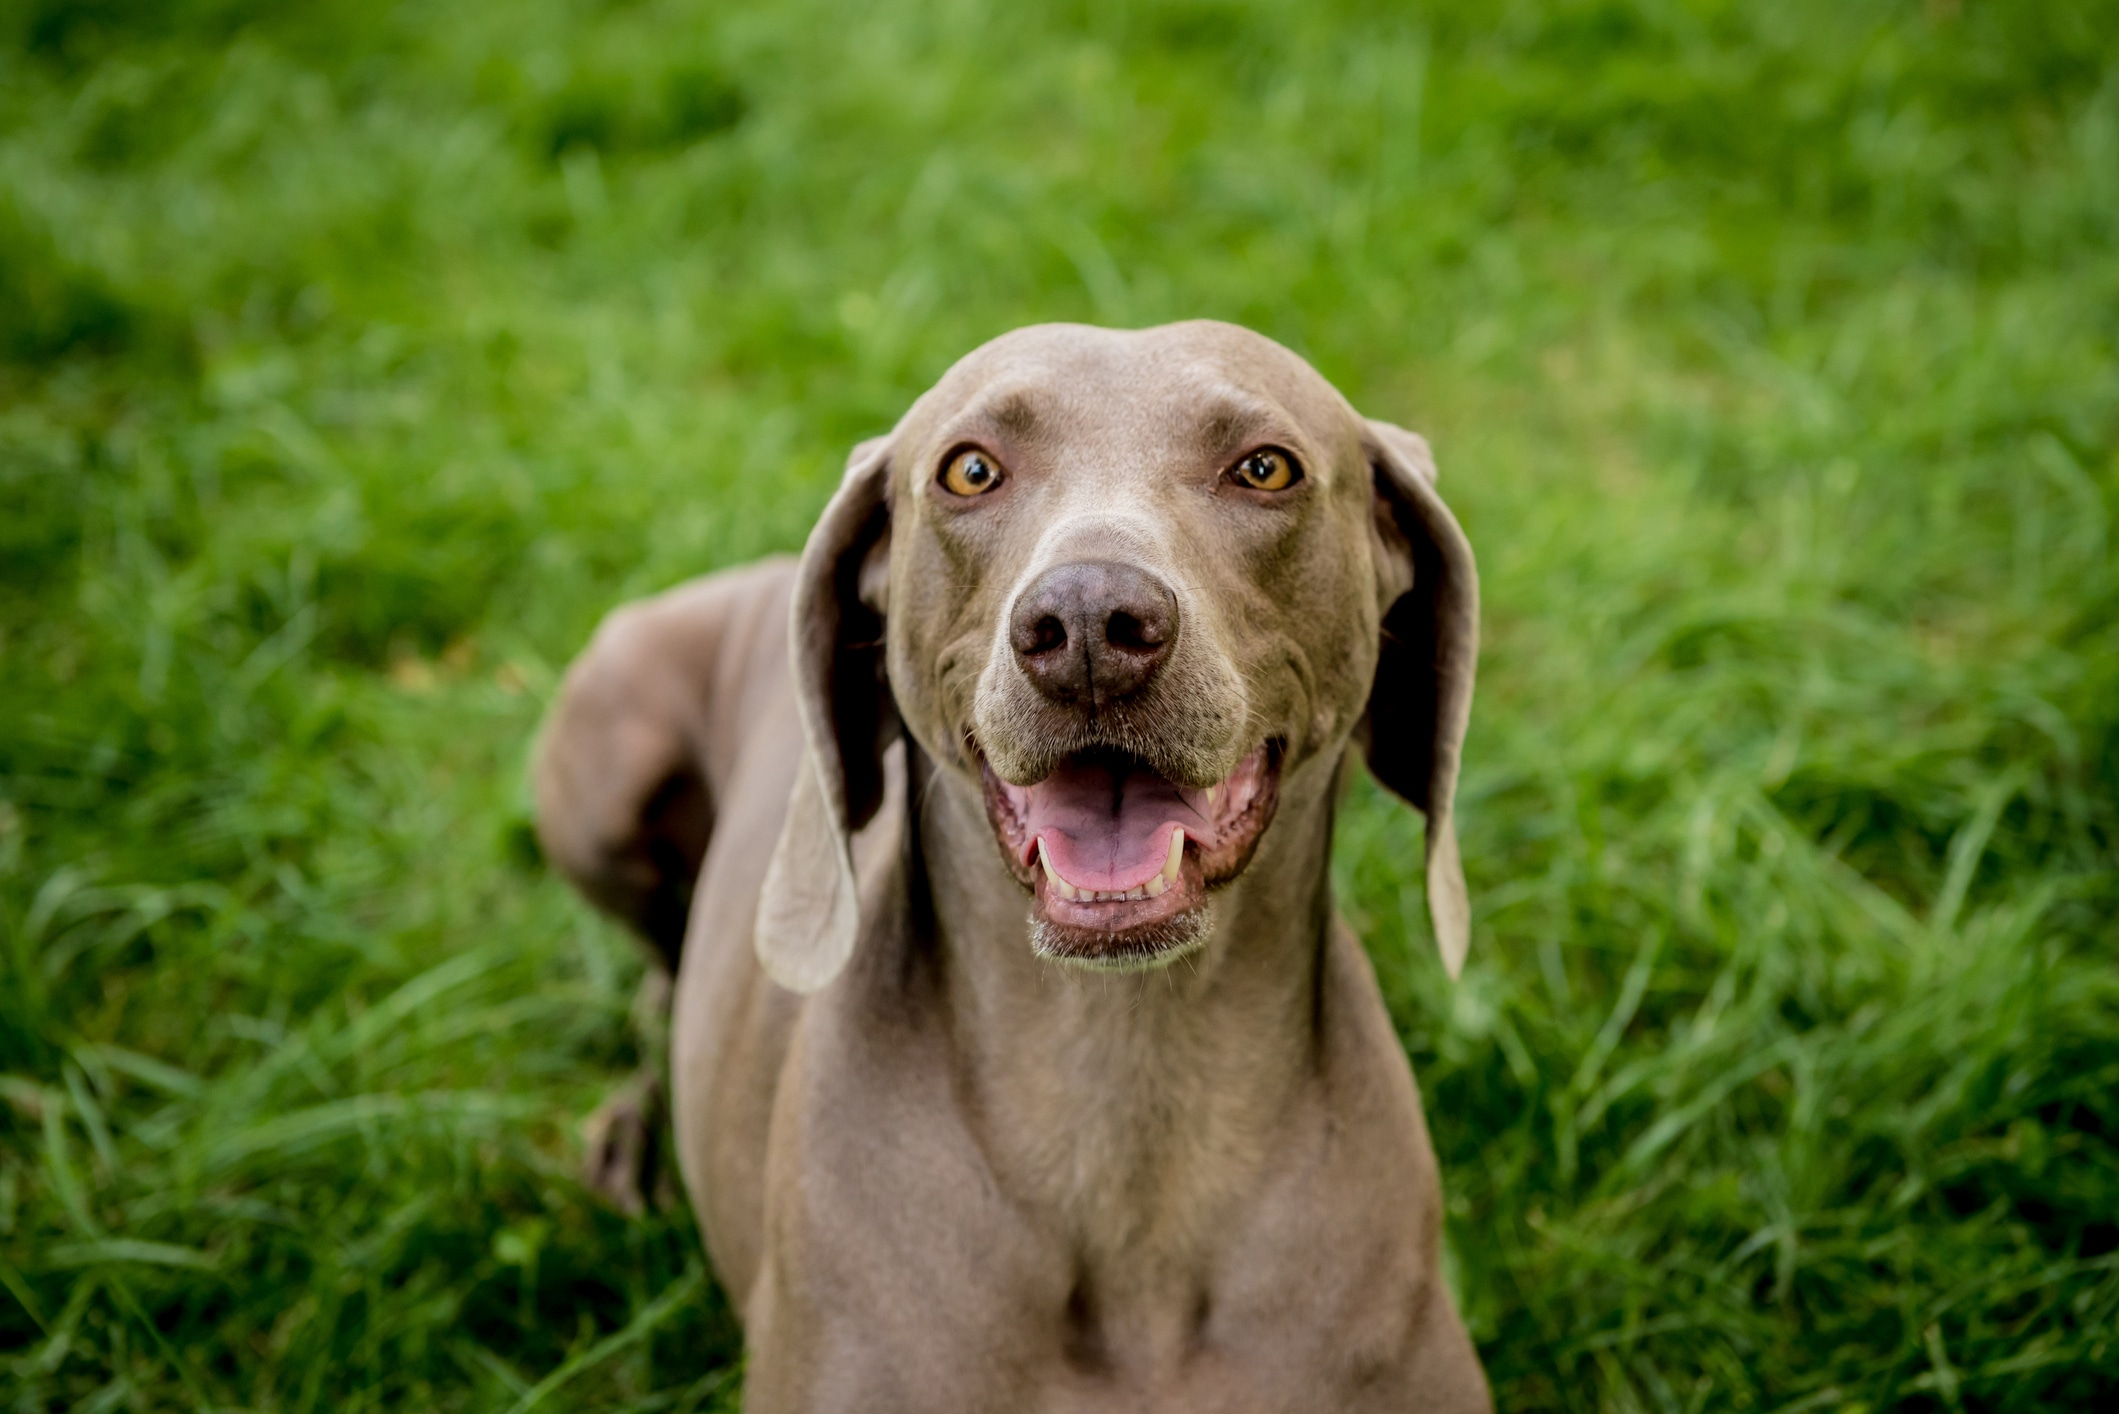 Portrait of cute weimaraner dog breed at the park.